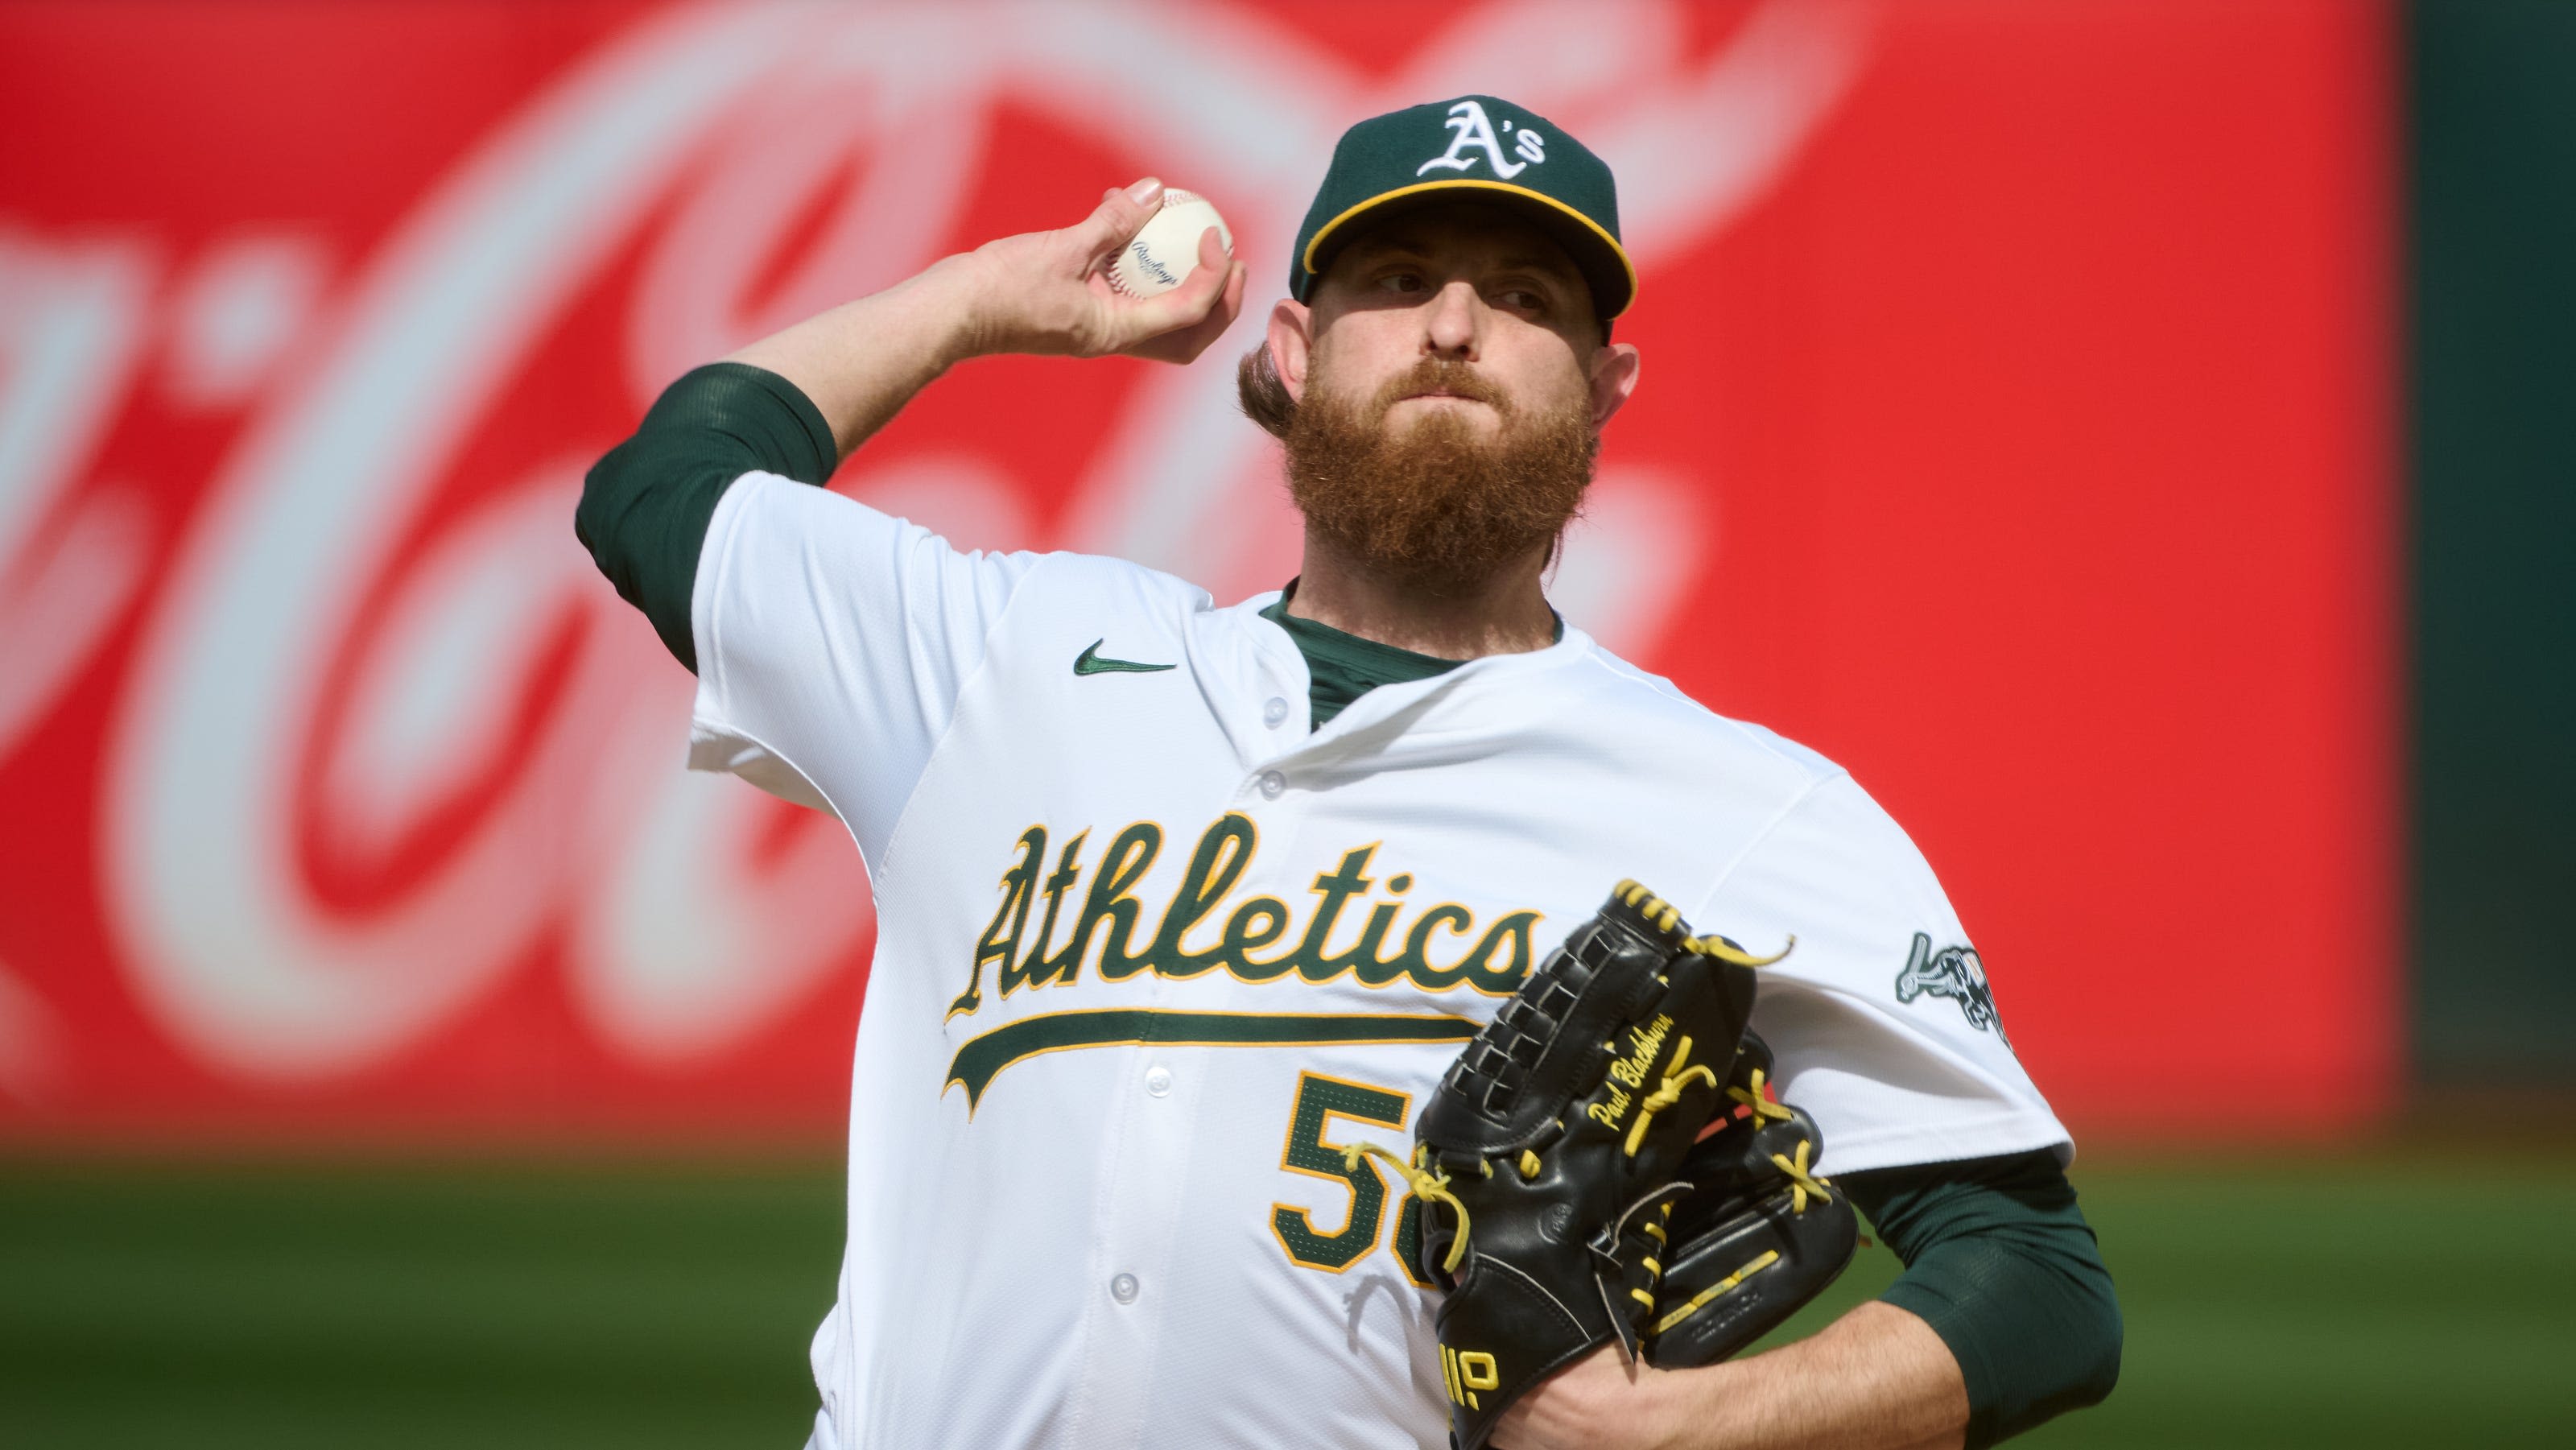 Mets get Paul Blackburn in trade with A's to add starter at Trade Deadline